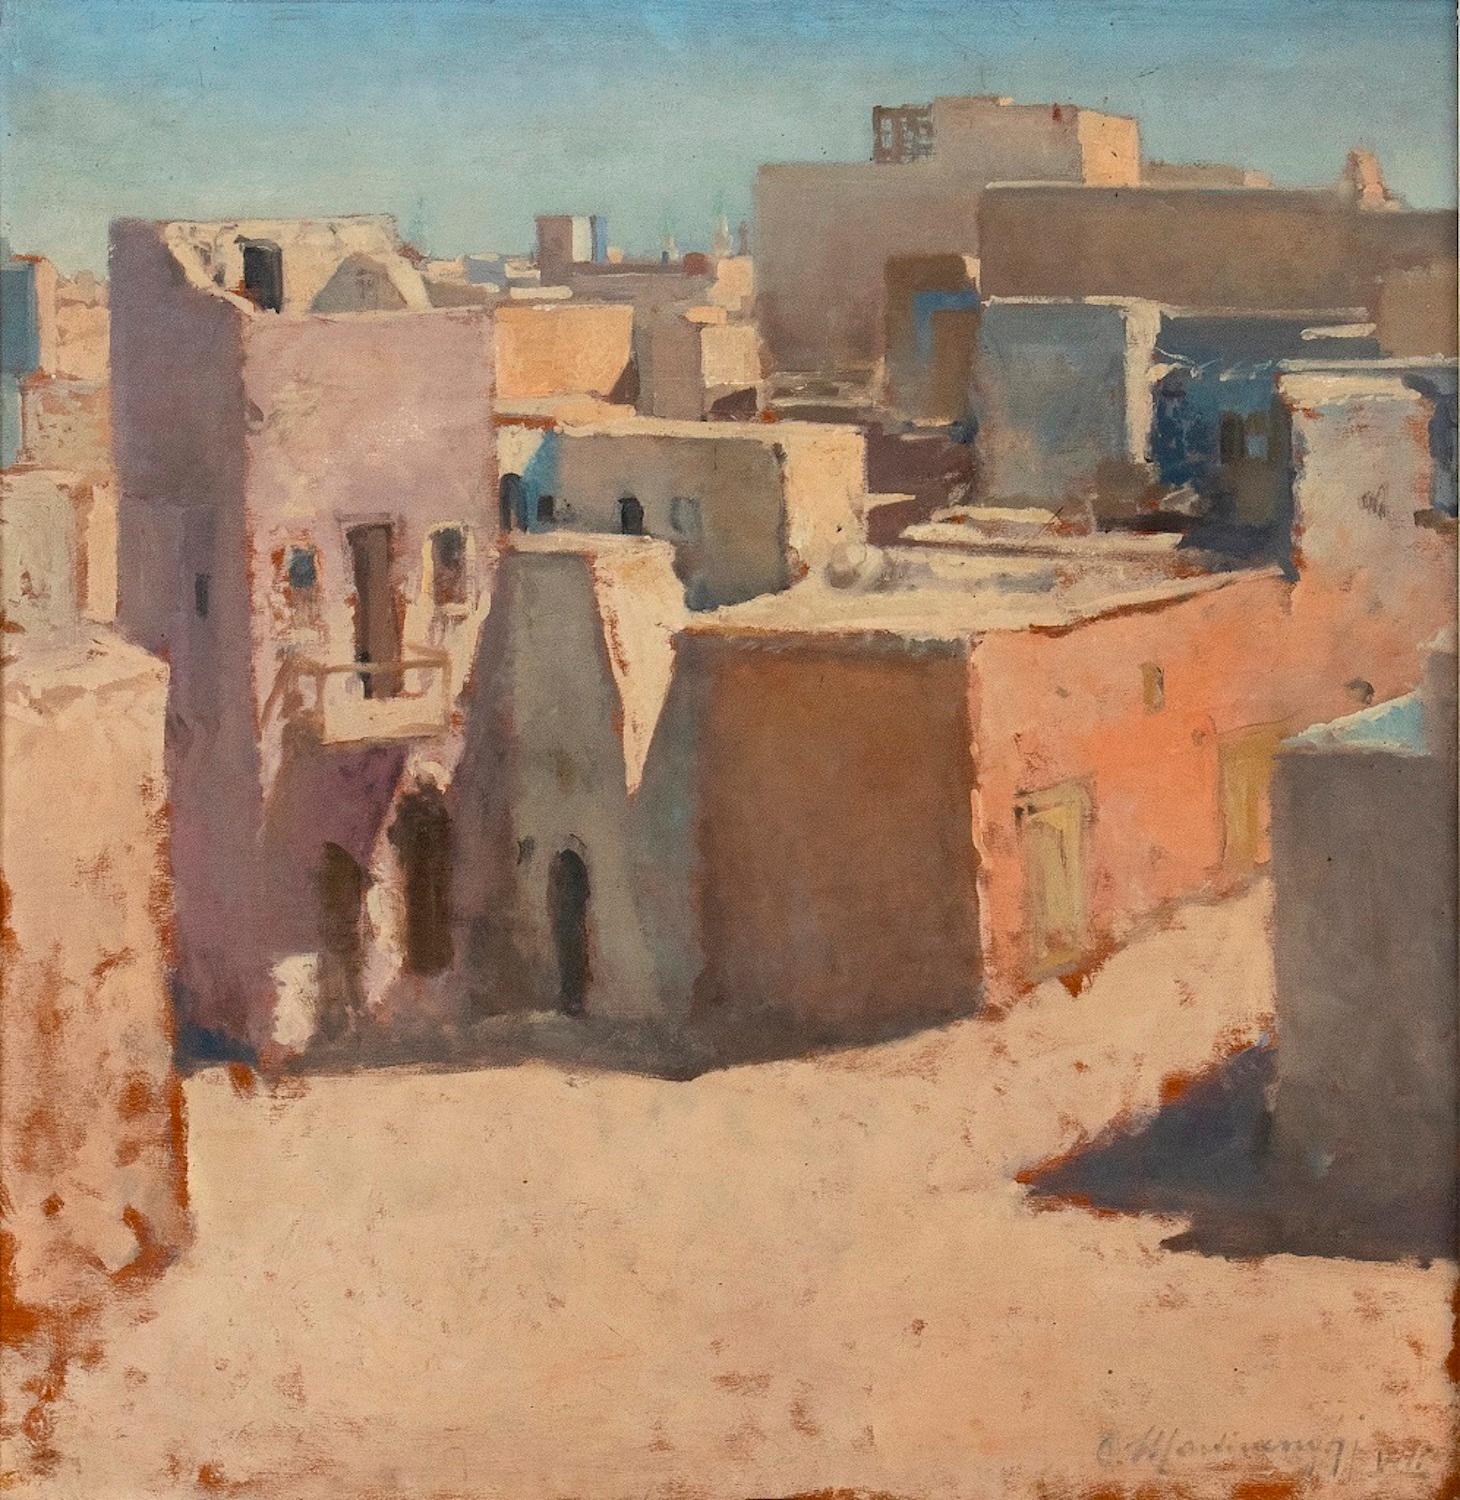 View of the Old Tripoli - Oil on Board - 1972